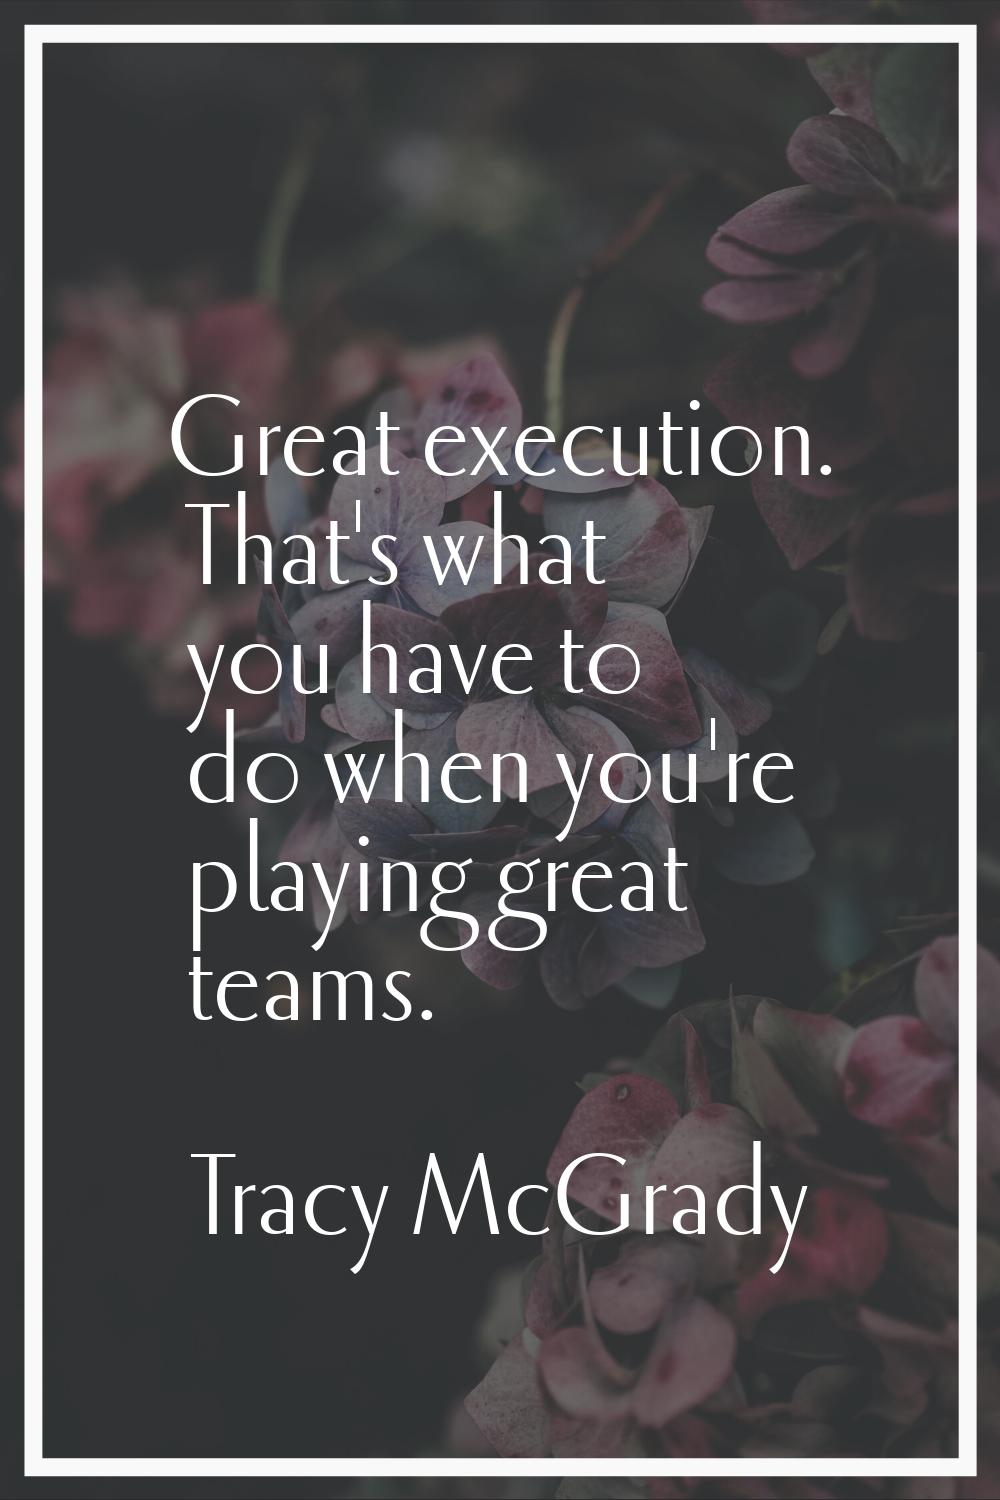 Great execution. That's what you have to do when you're playing great teams.